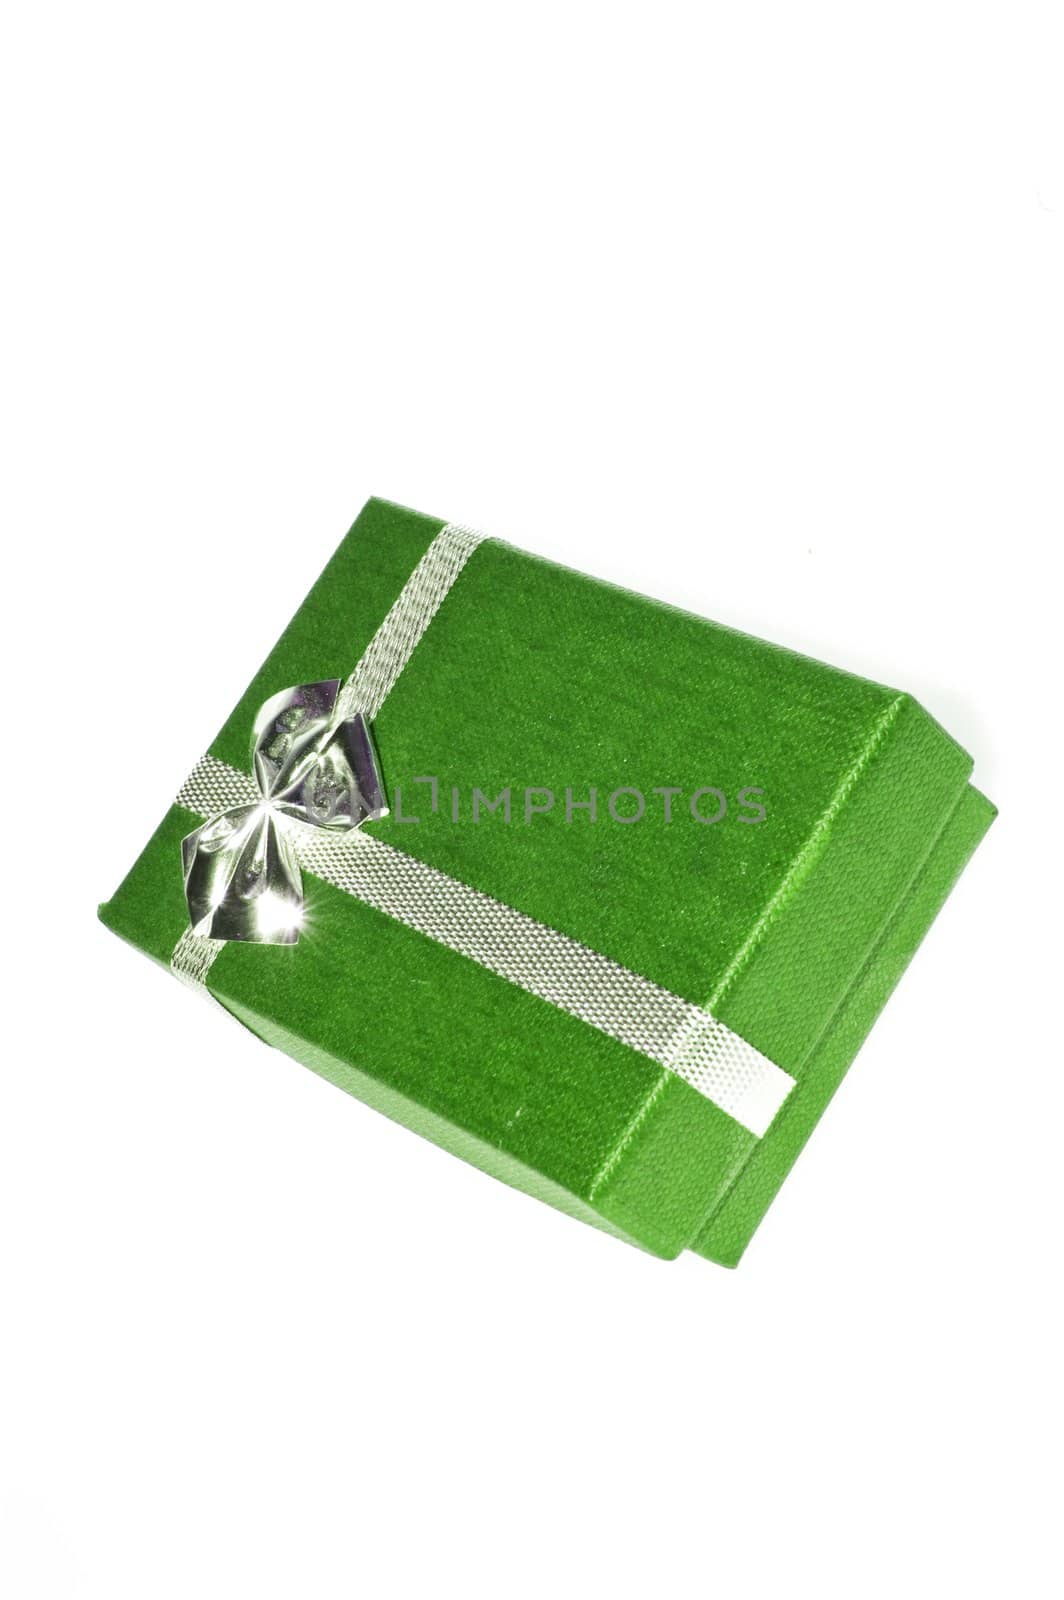 Green box isolated on white background